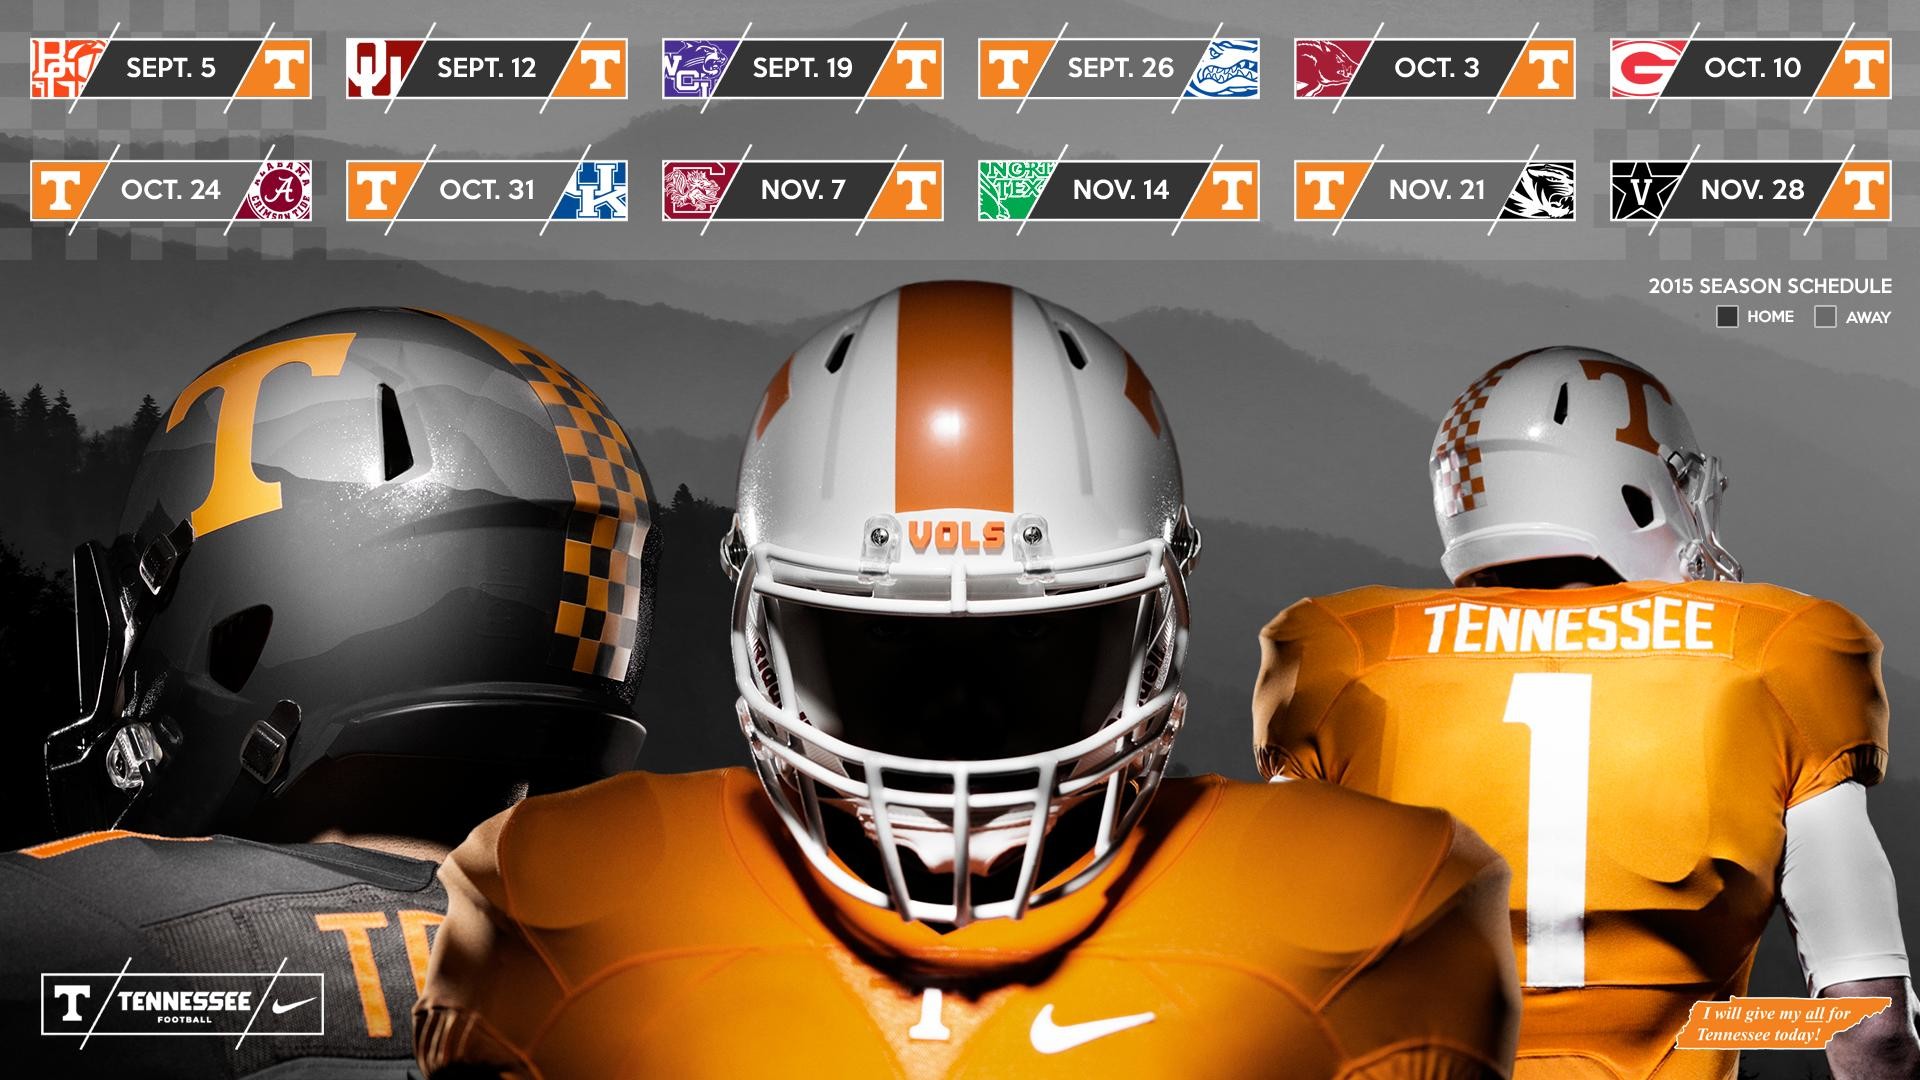 1920x1080 ... Tennessee Vols Football Wallpaper 2016 Image Gallery - HCPR ...